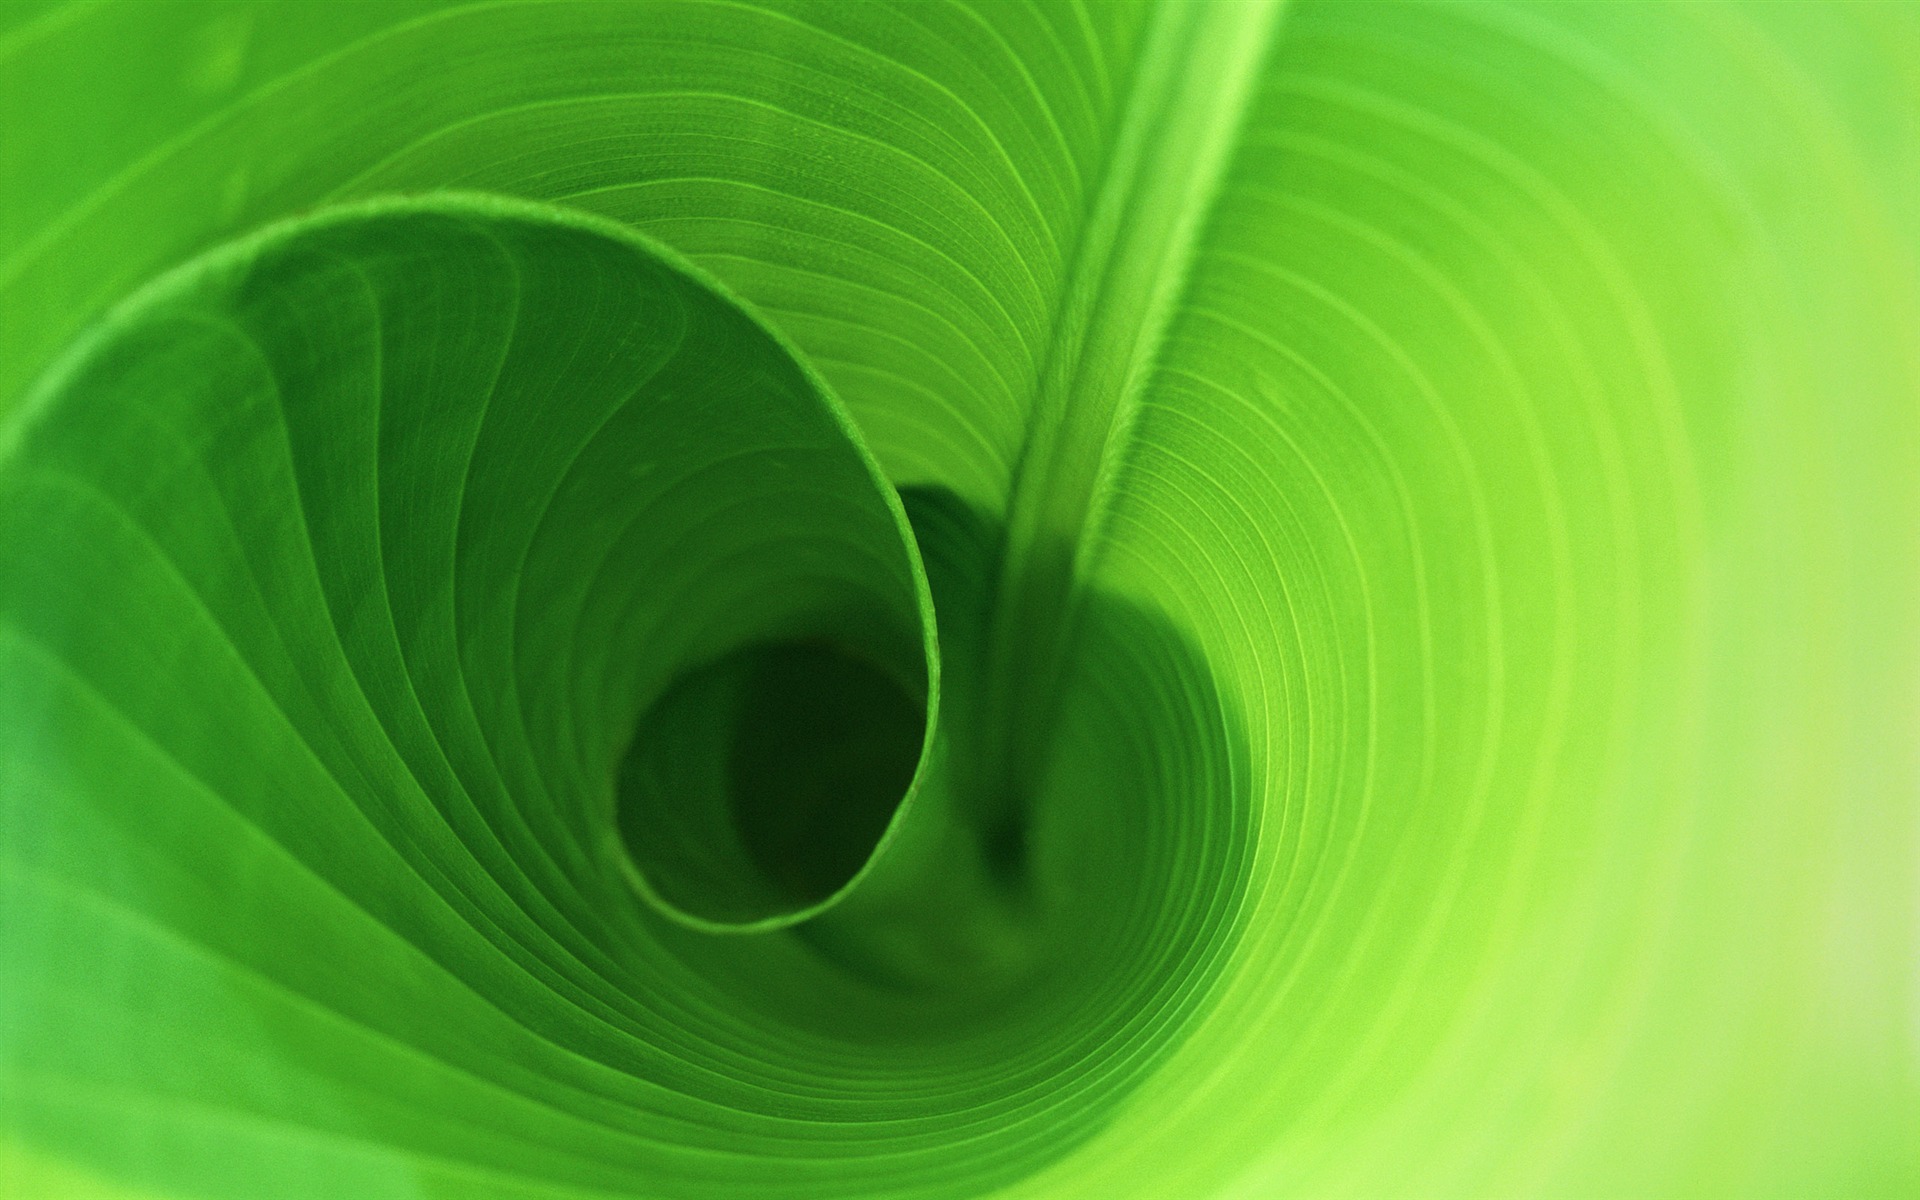 Large green leaves close-up flower wallpaper (2) #3 - 1920x1200